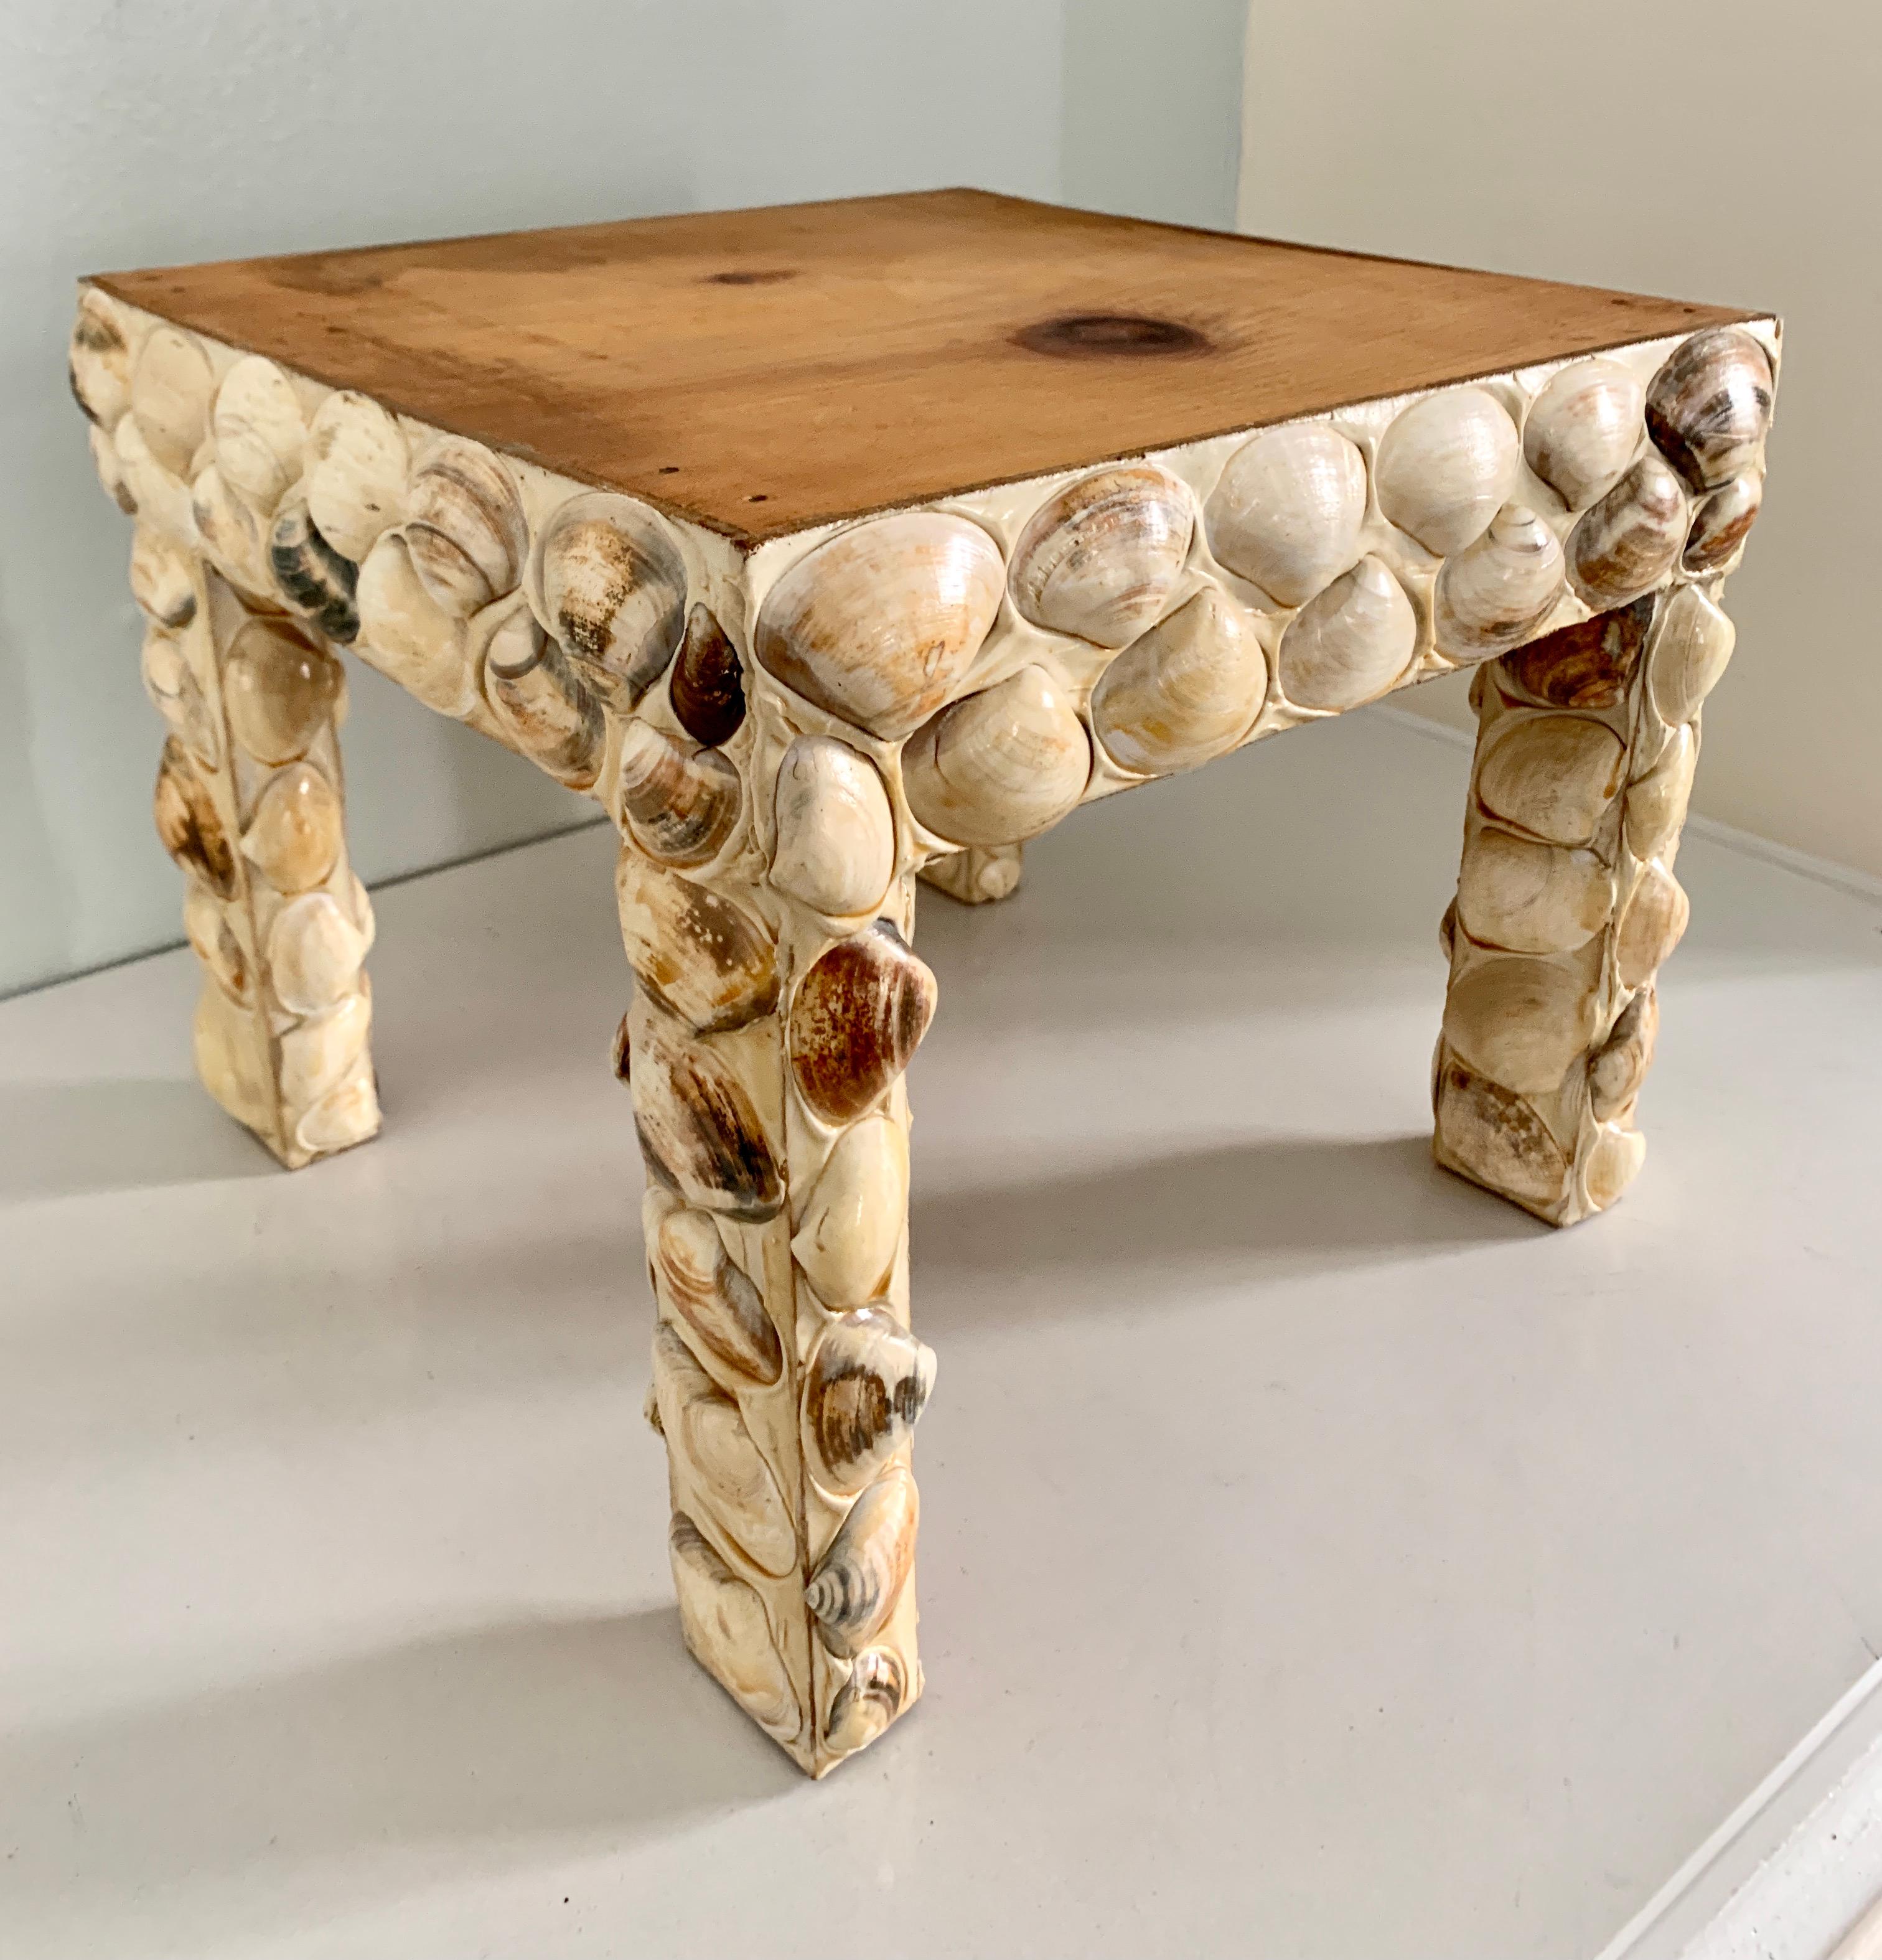 A wonderful table perfectly suited for many rooms or spaces and especially those near the sea side or with an ocean theme. The tables legs are covered entirely with Cockle shells and in very good condition. The top is exposed wood to remain flat for